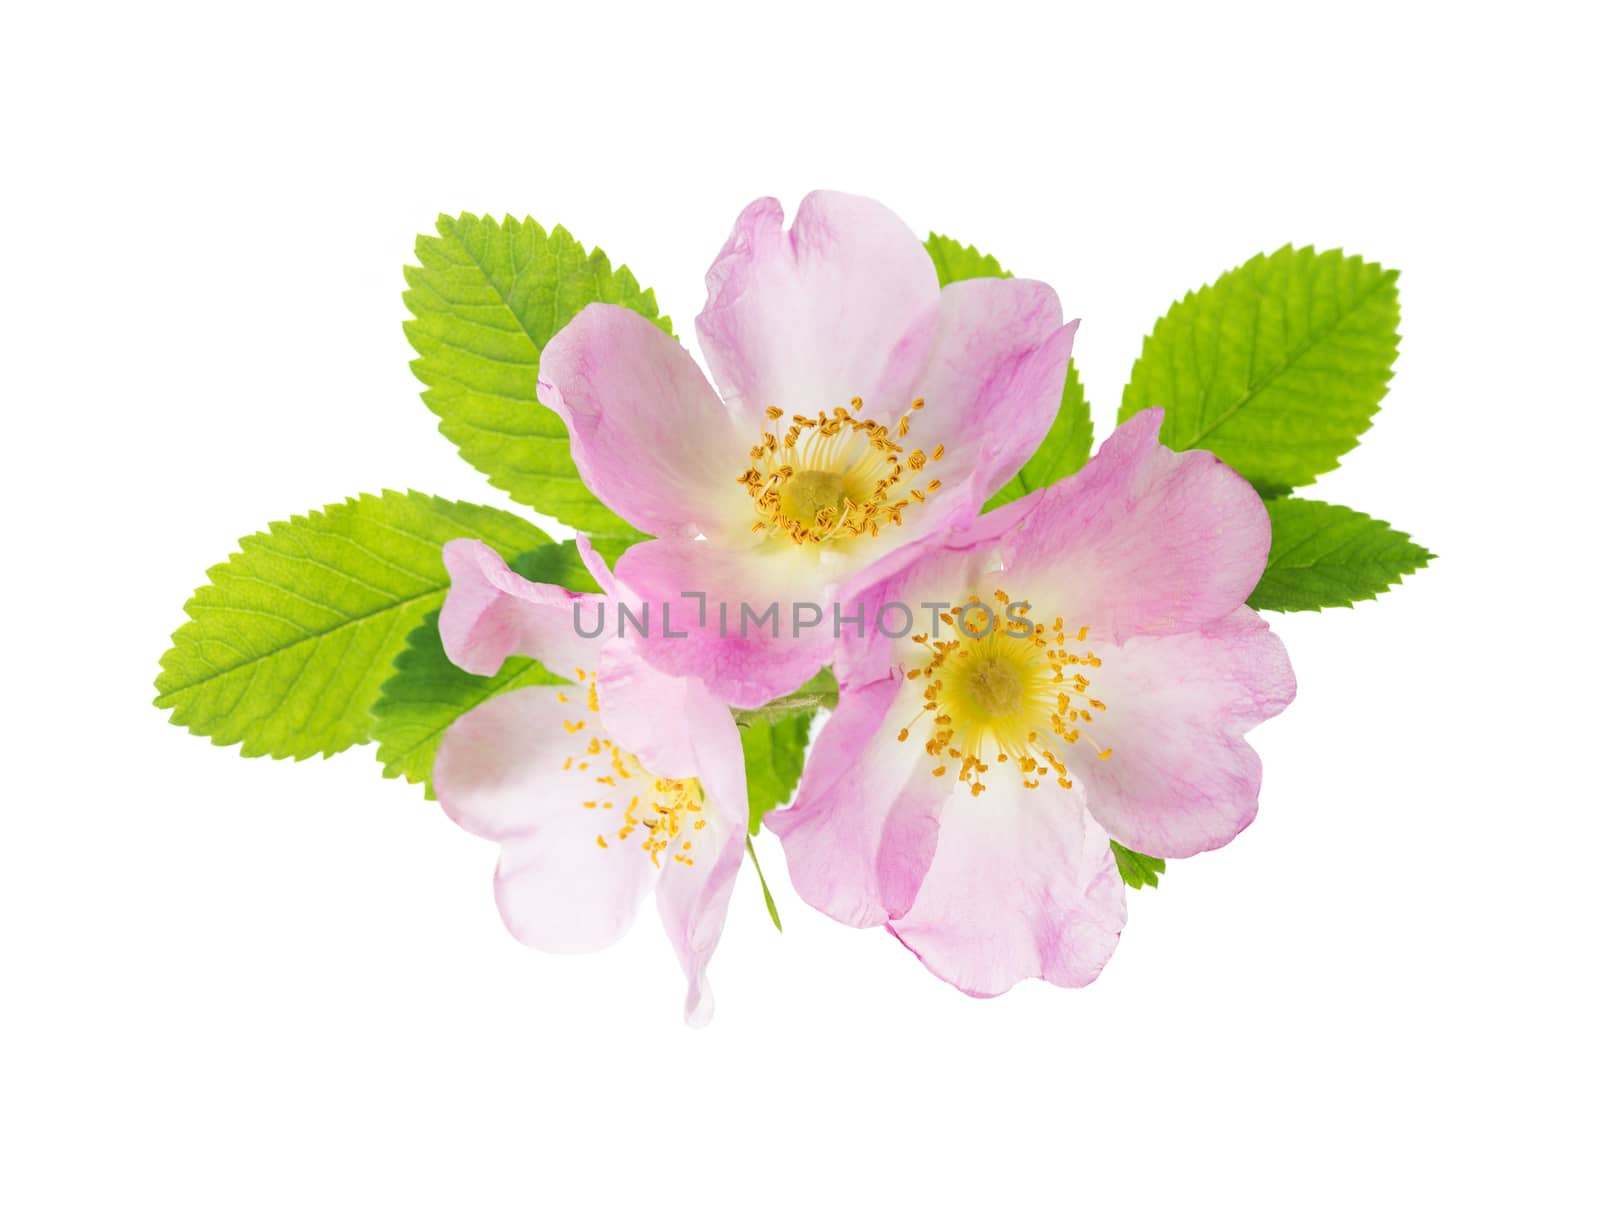 Three delicate pink wild rose flowers with green leaves isolated on white background